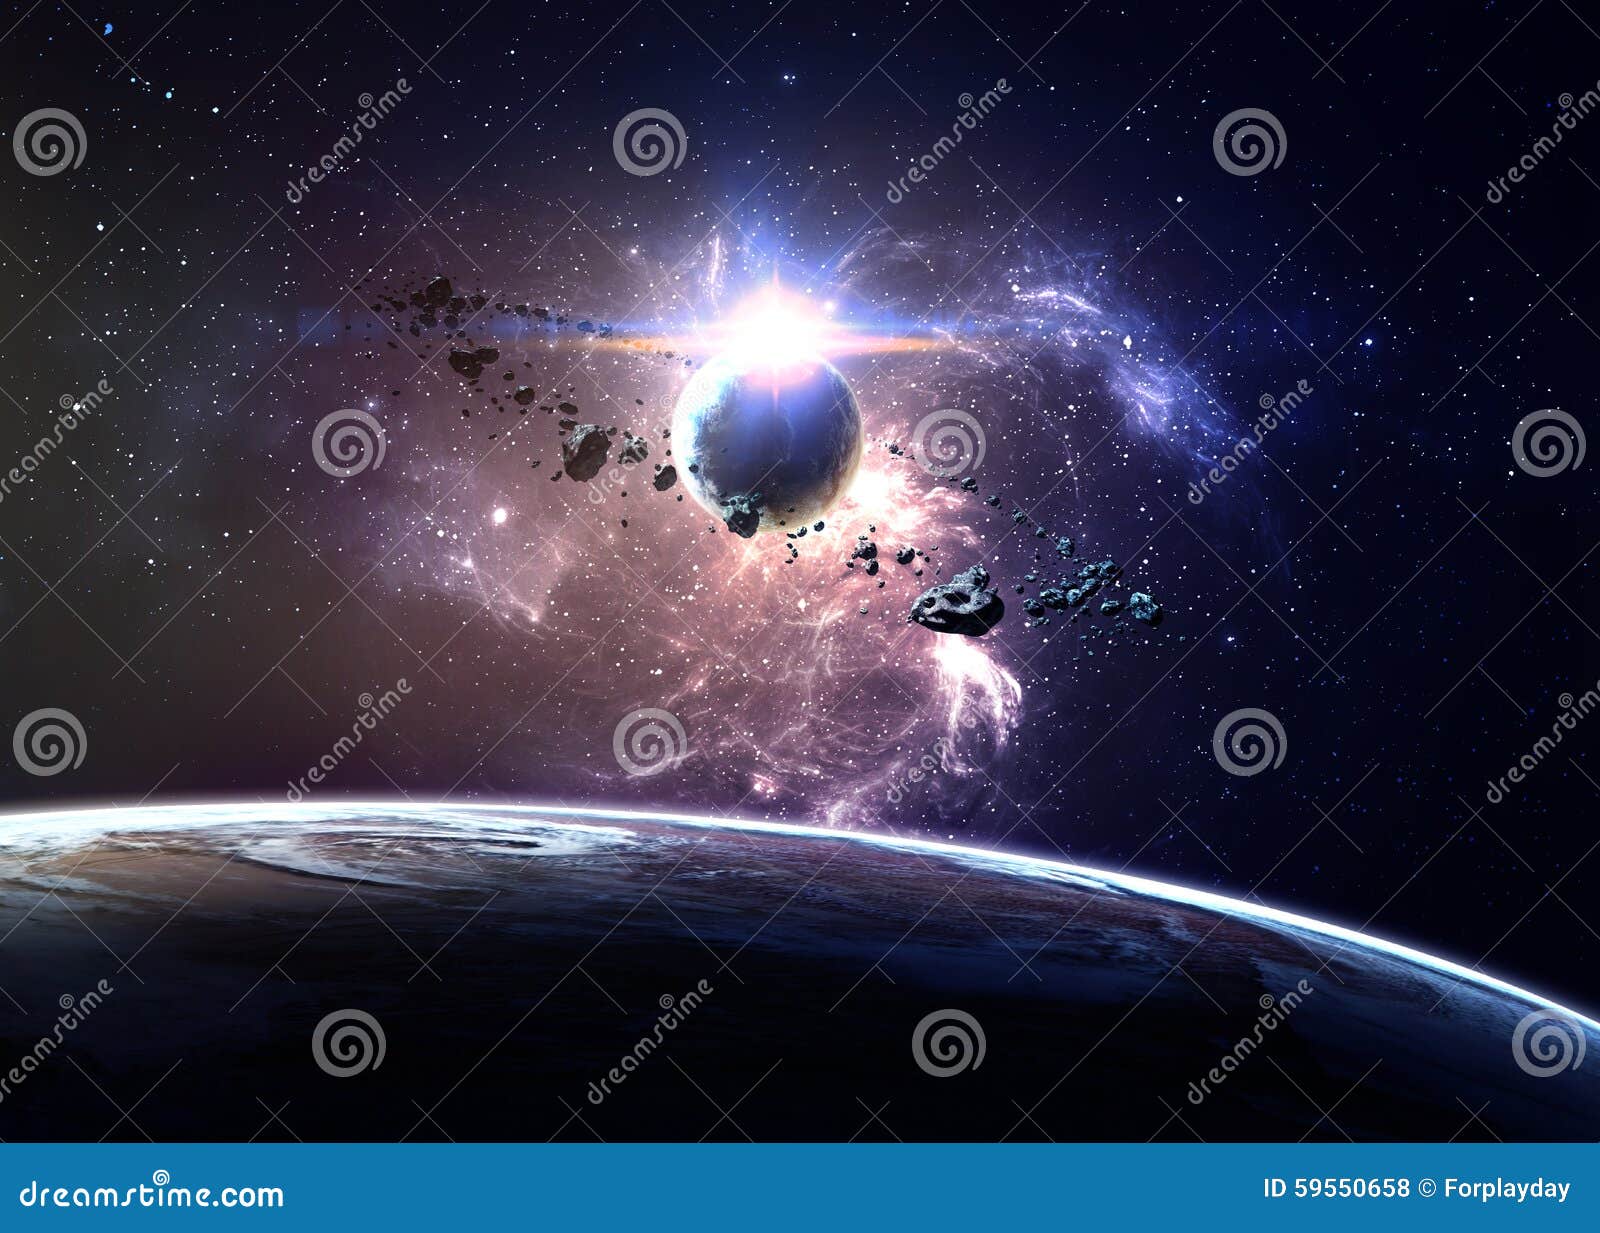 planets over the nebulae in space